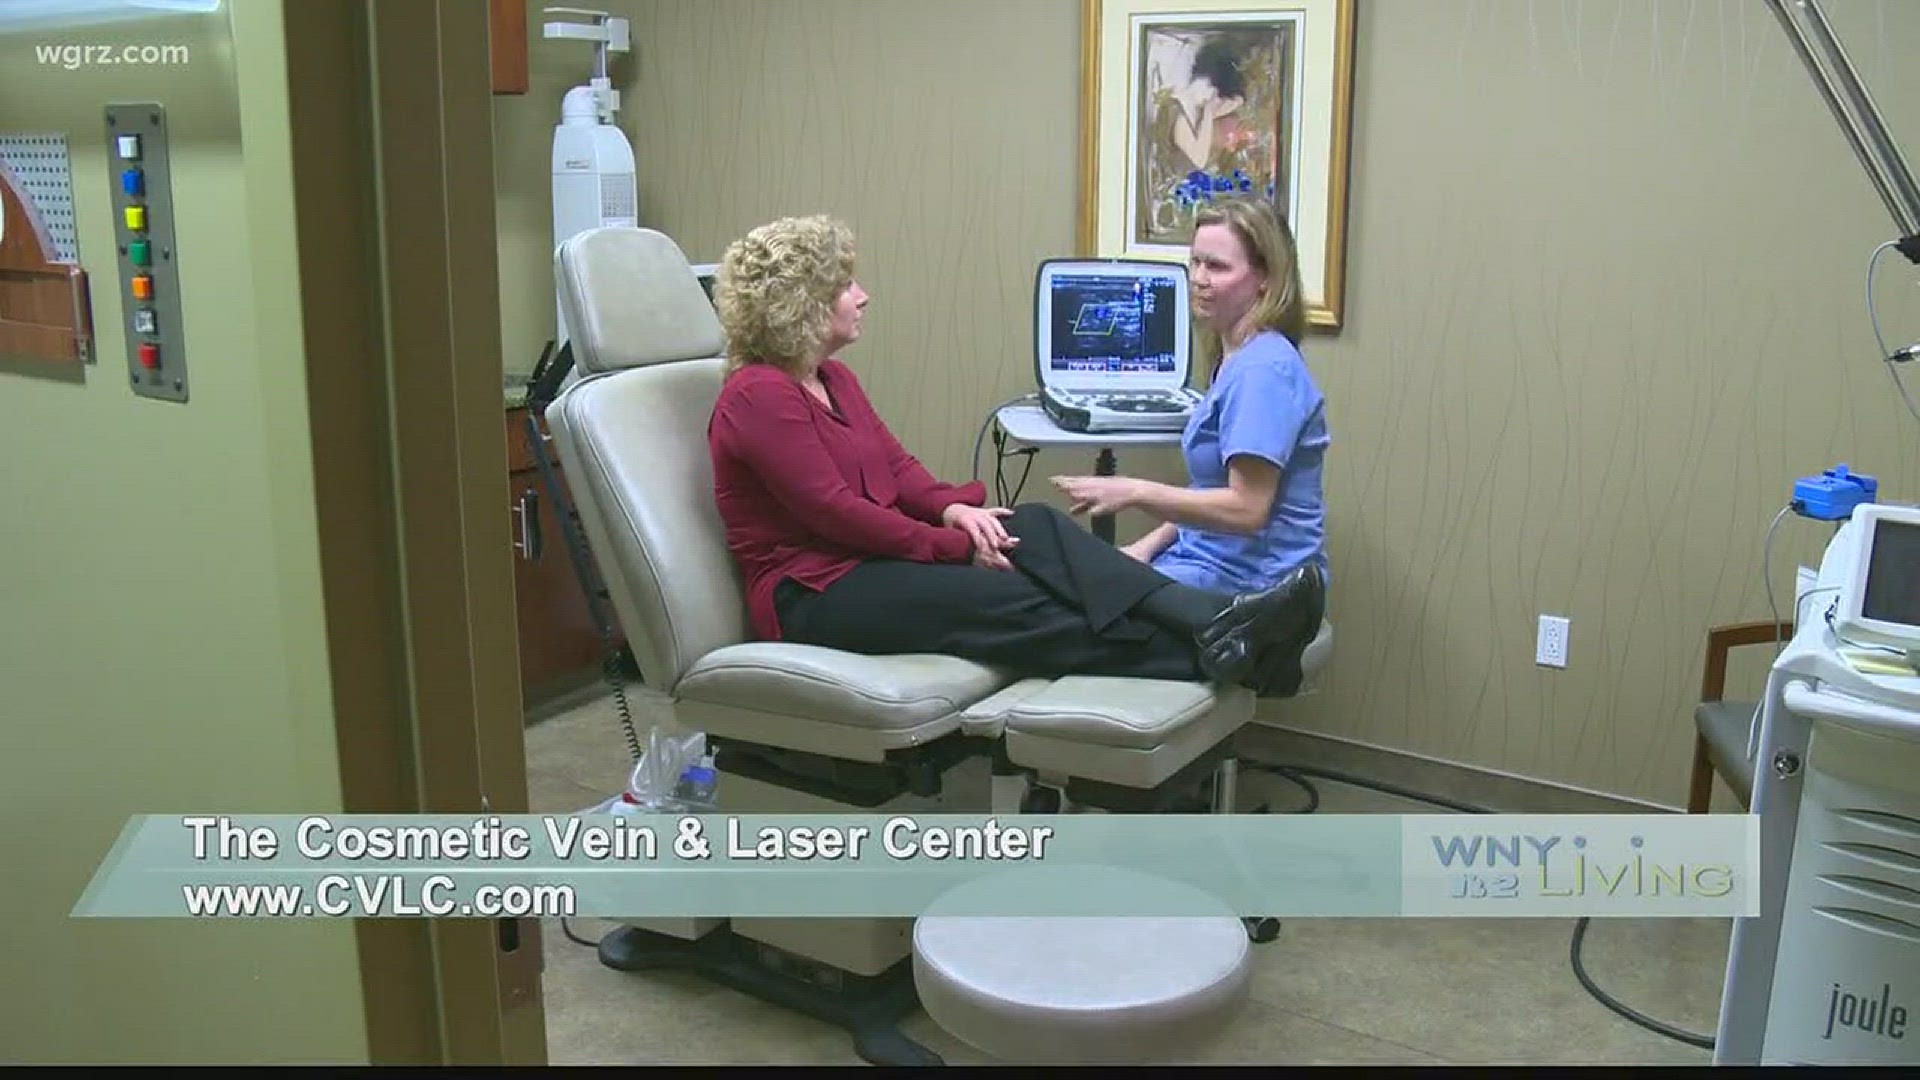 WNY Living - February 12 - The Cosmetic Vein and Laser Center